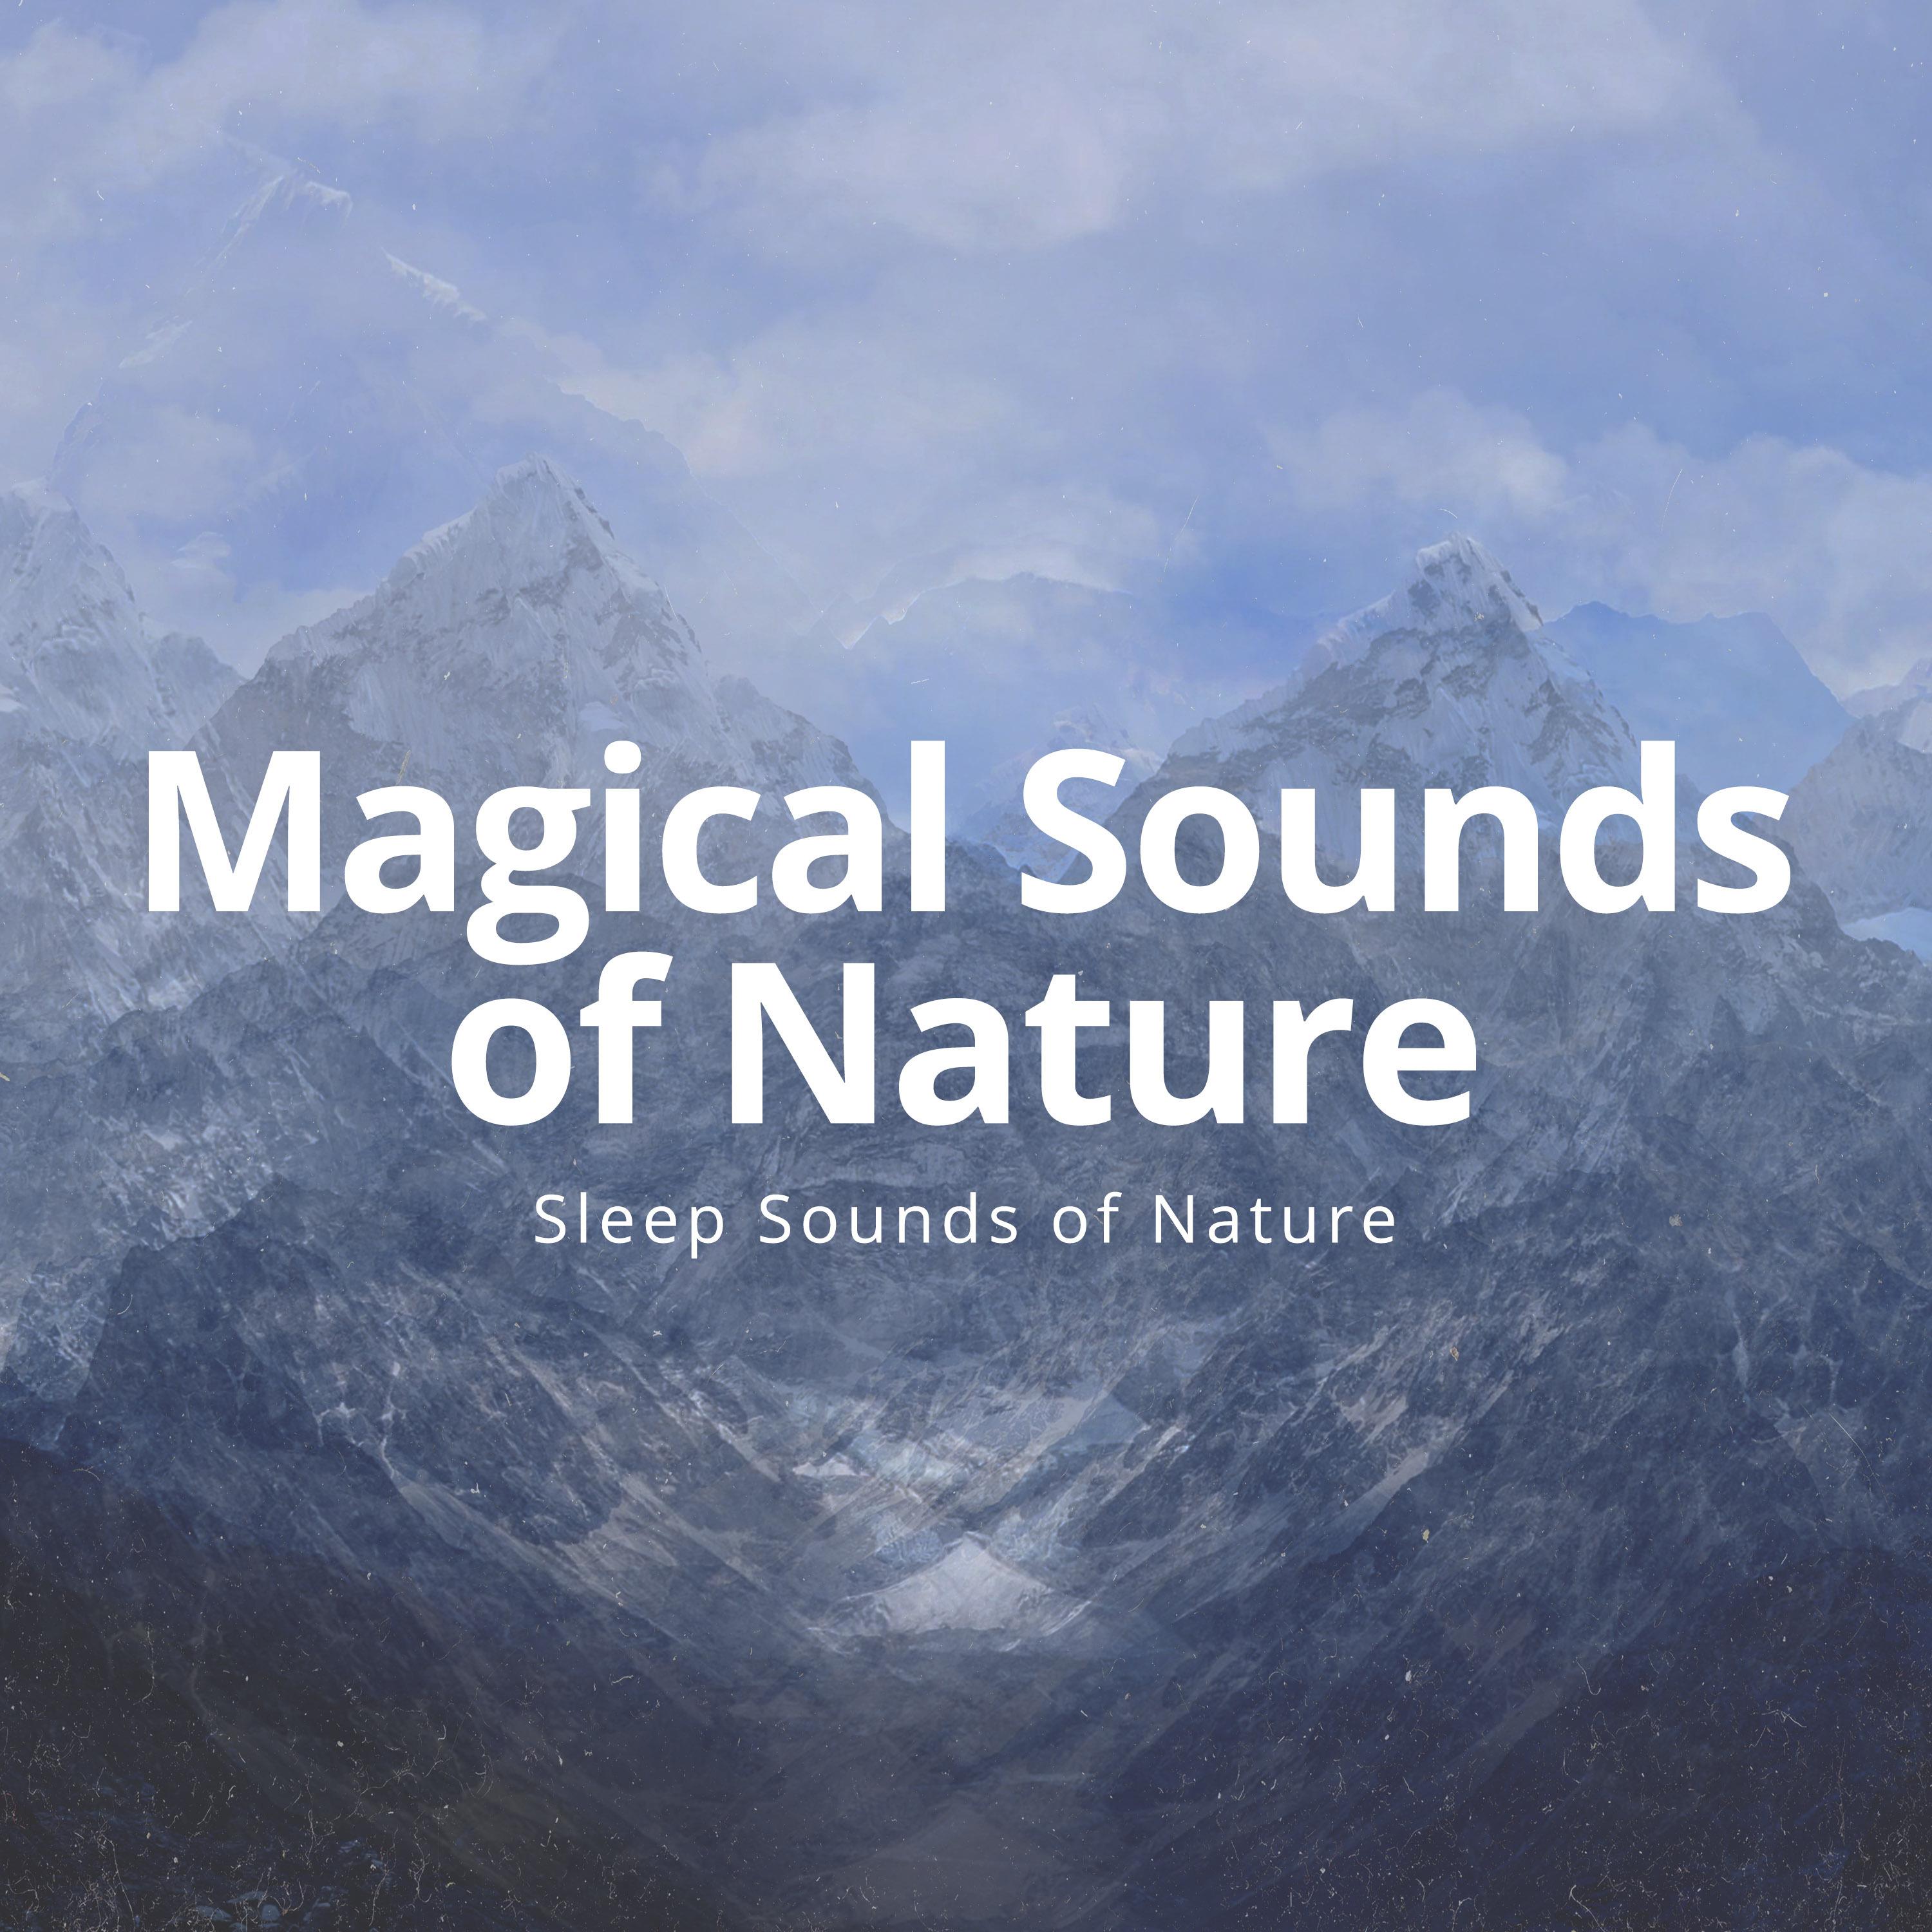 Magical Sounds of Nature